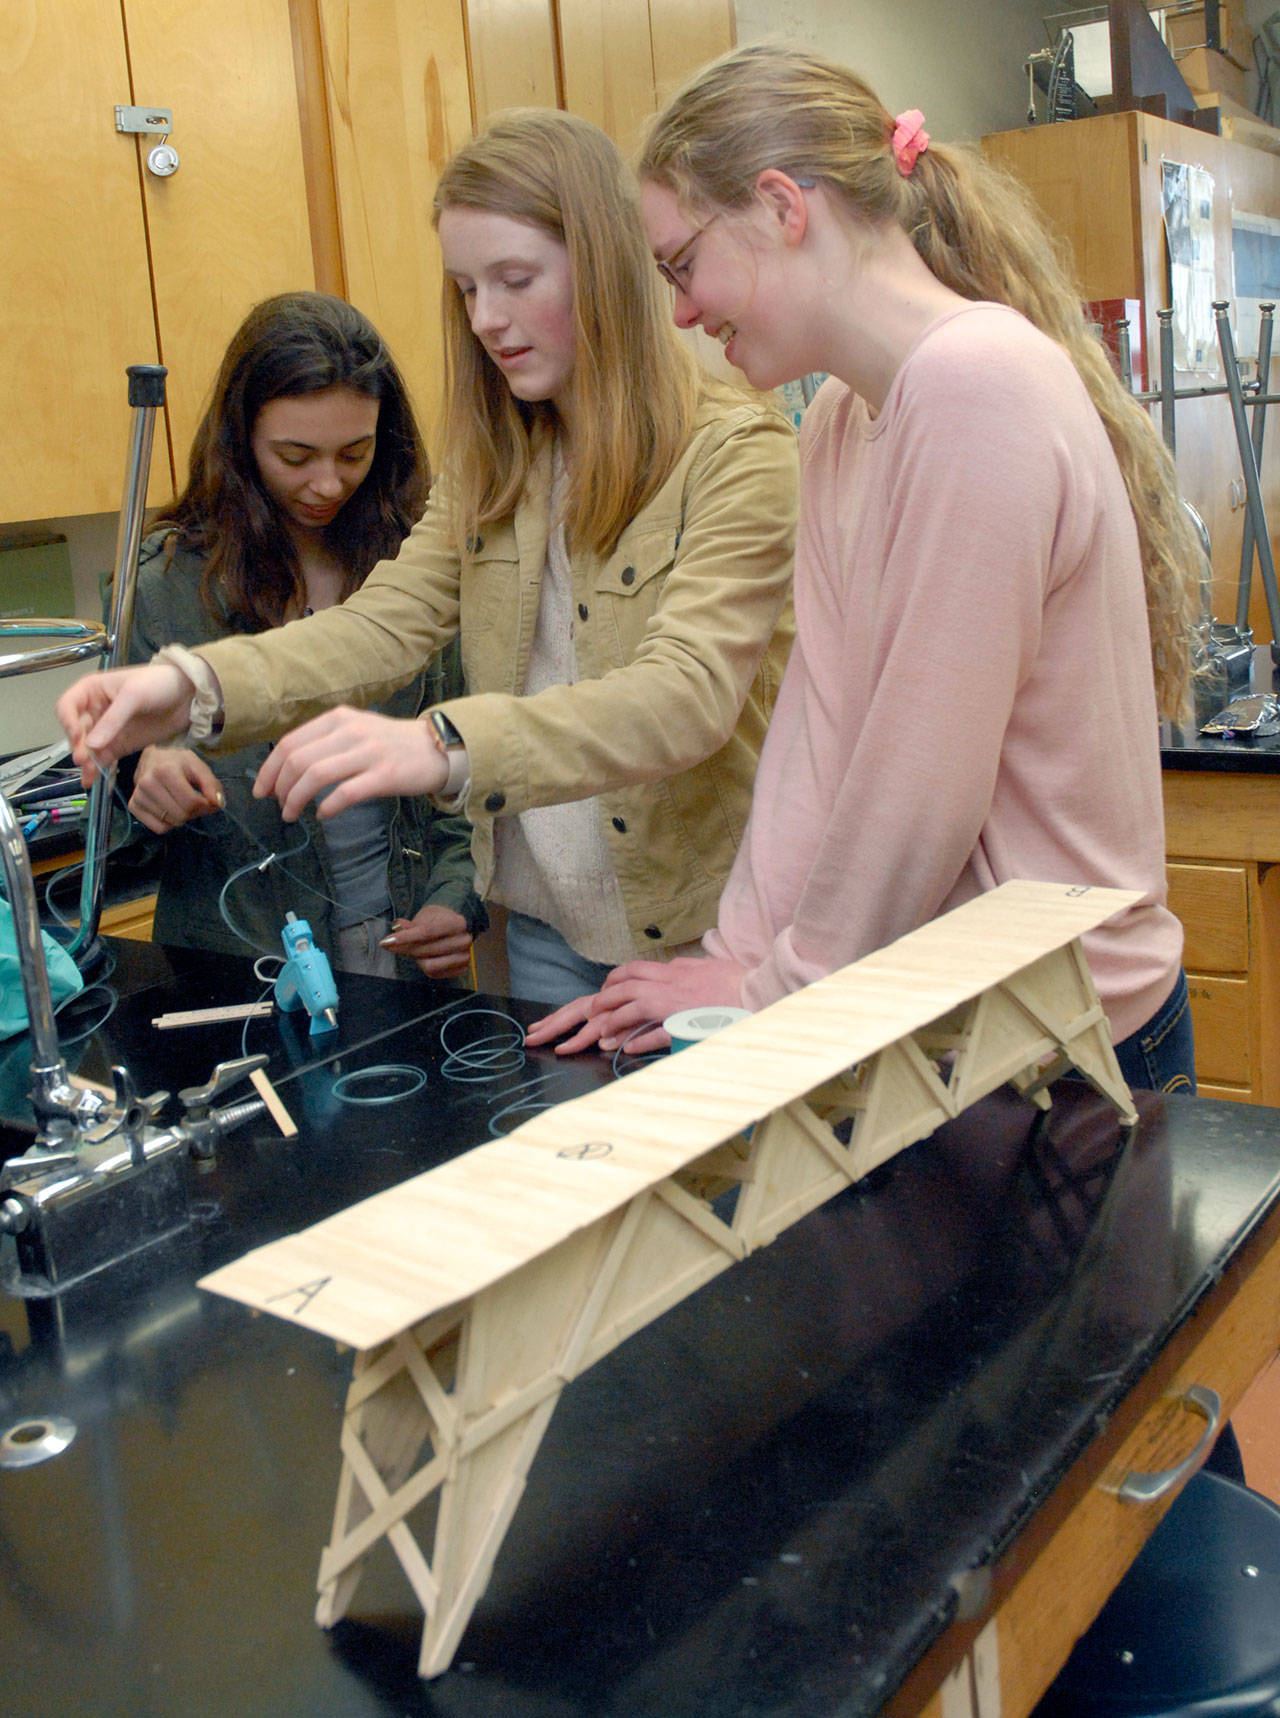 Student bridgebuilders, from left, Kynzie Deleon, Emily Sirgiuy and Emma Weller work to rebuild a portion of their bridge on Wednesday after it cracked under the weight of a 273 lb. press during competition on Feb. 8. (Keith Thorpe/Peninsula Daily News)